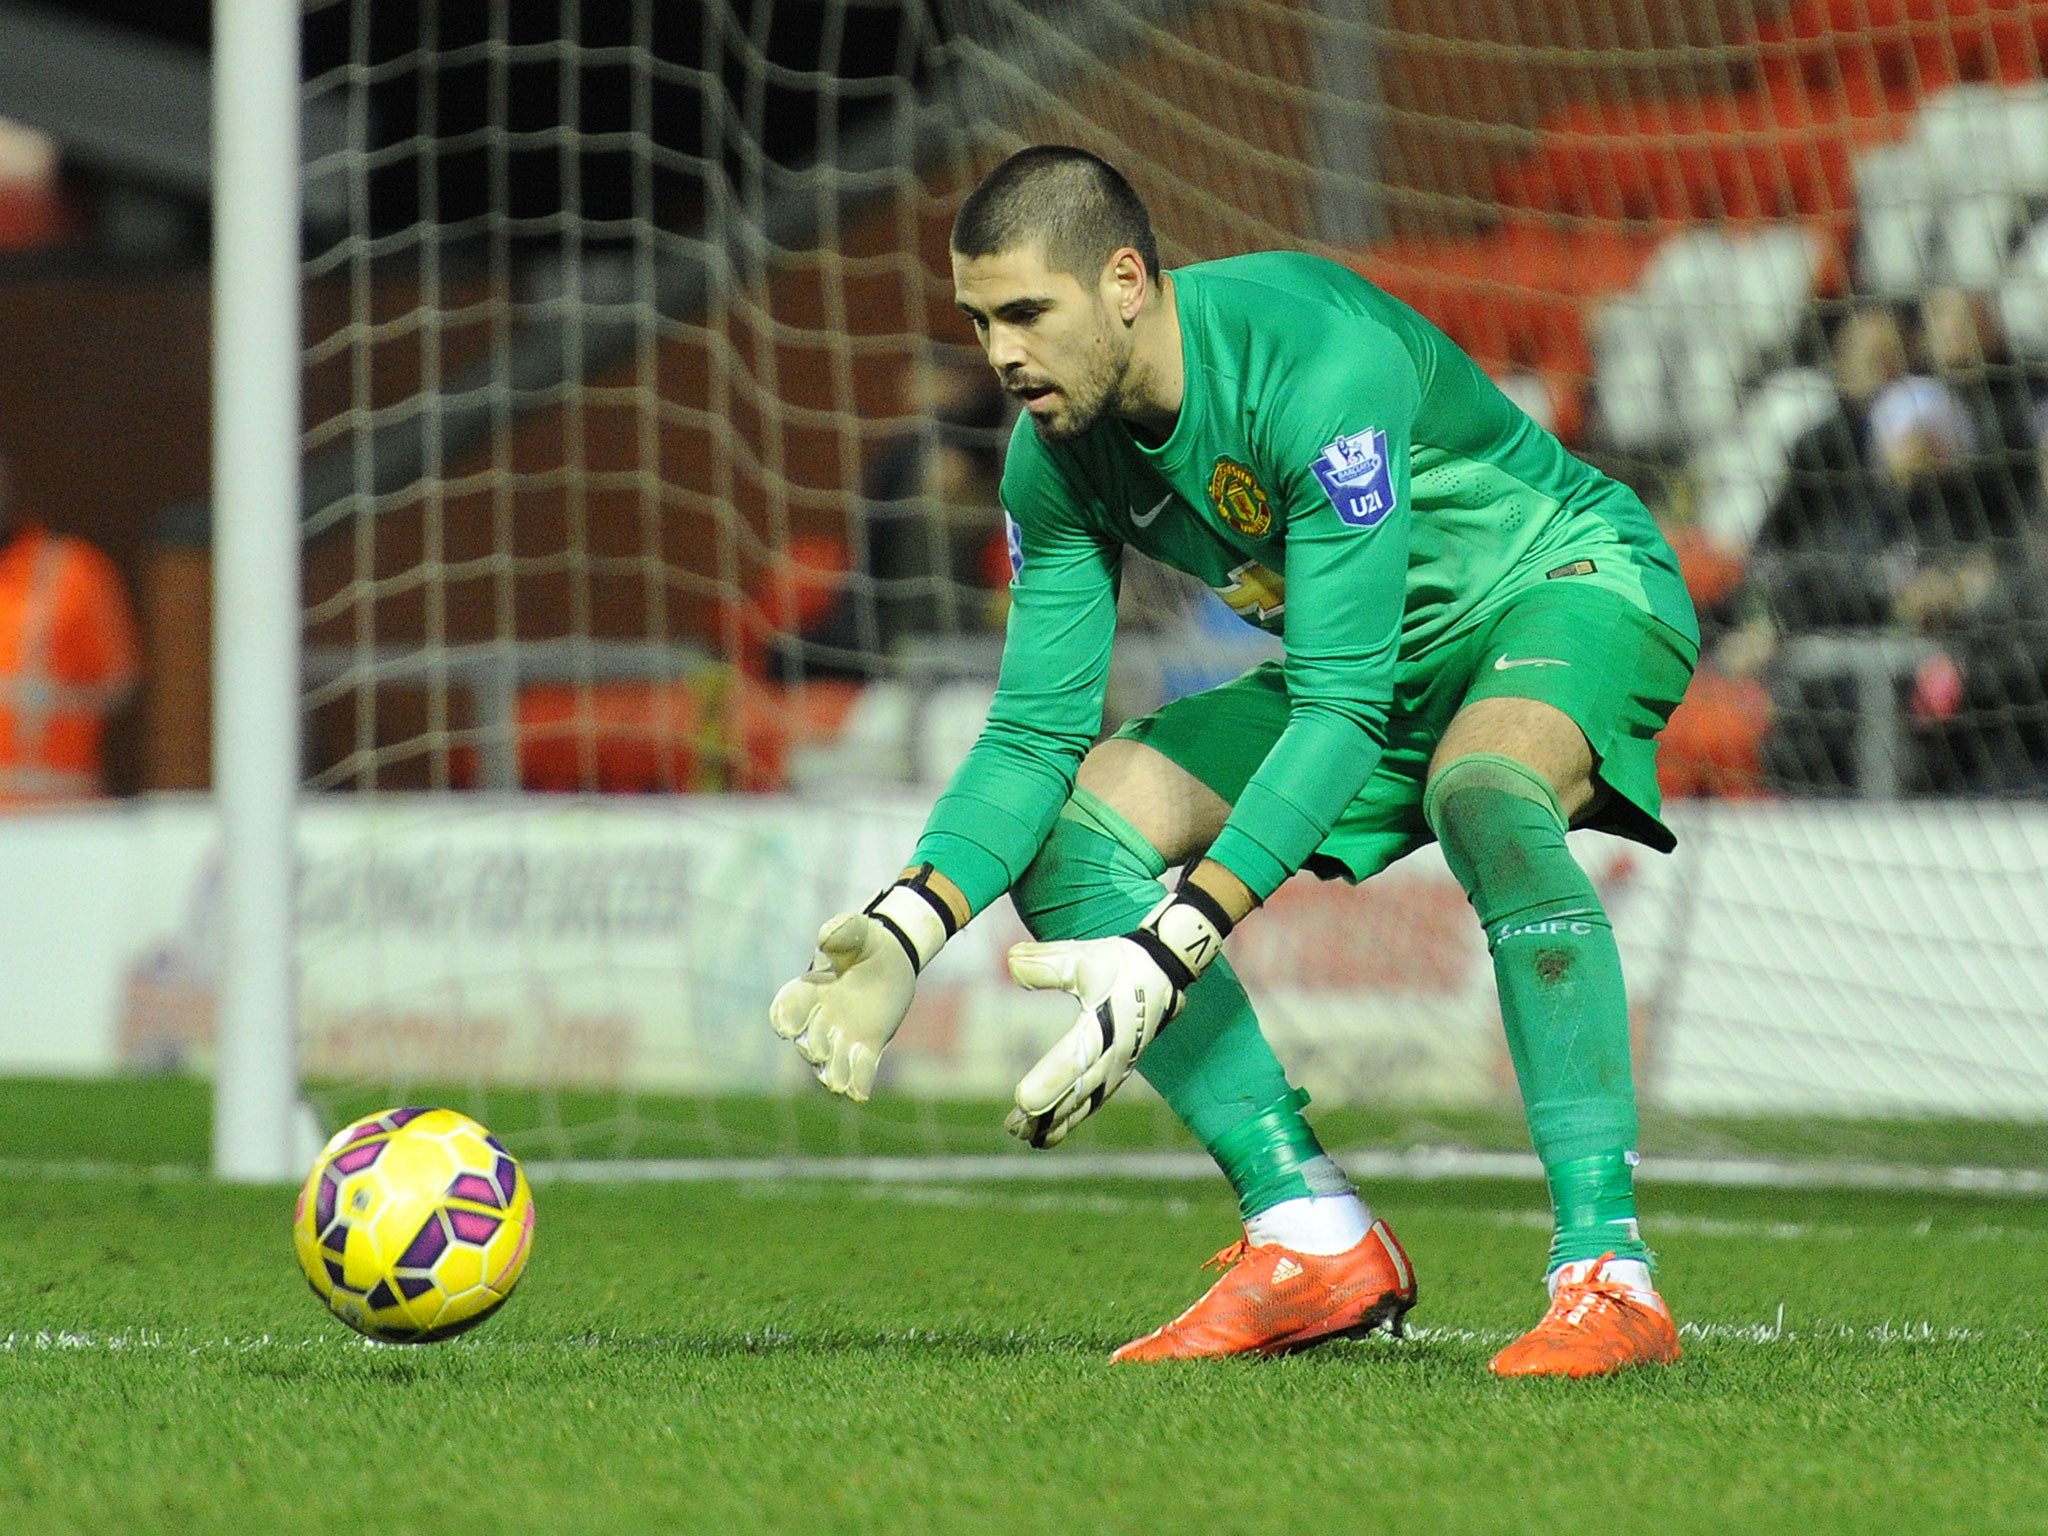 Victor Valdes made his return to football in Manchester United Under-21s 2-1 victory over Liverpool Under-21s